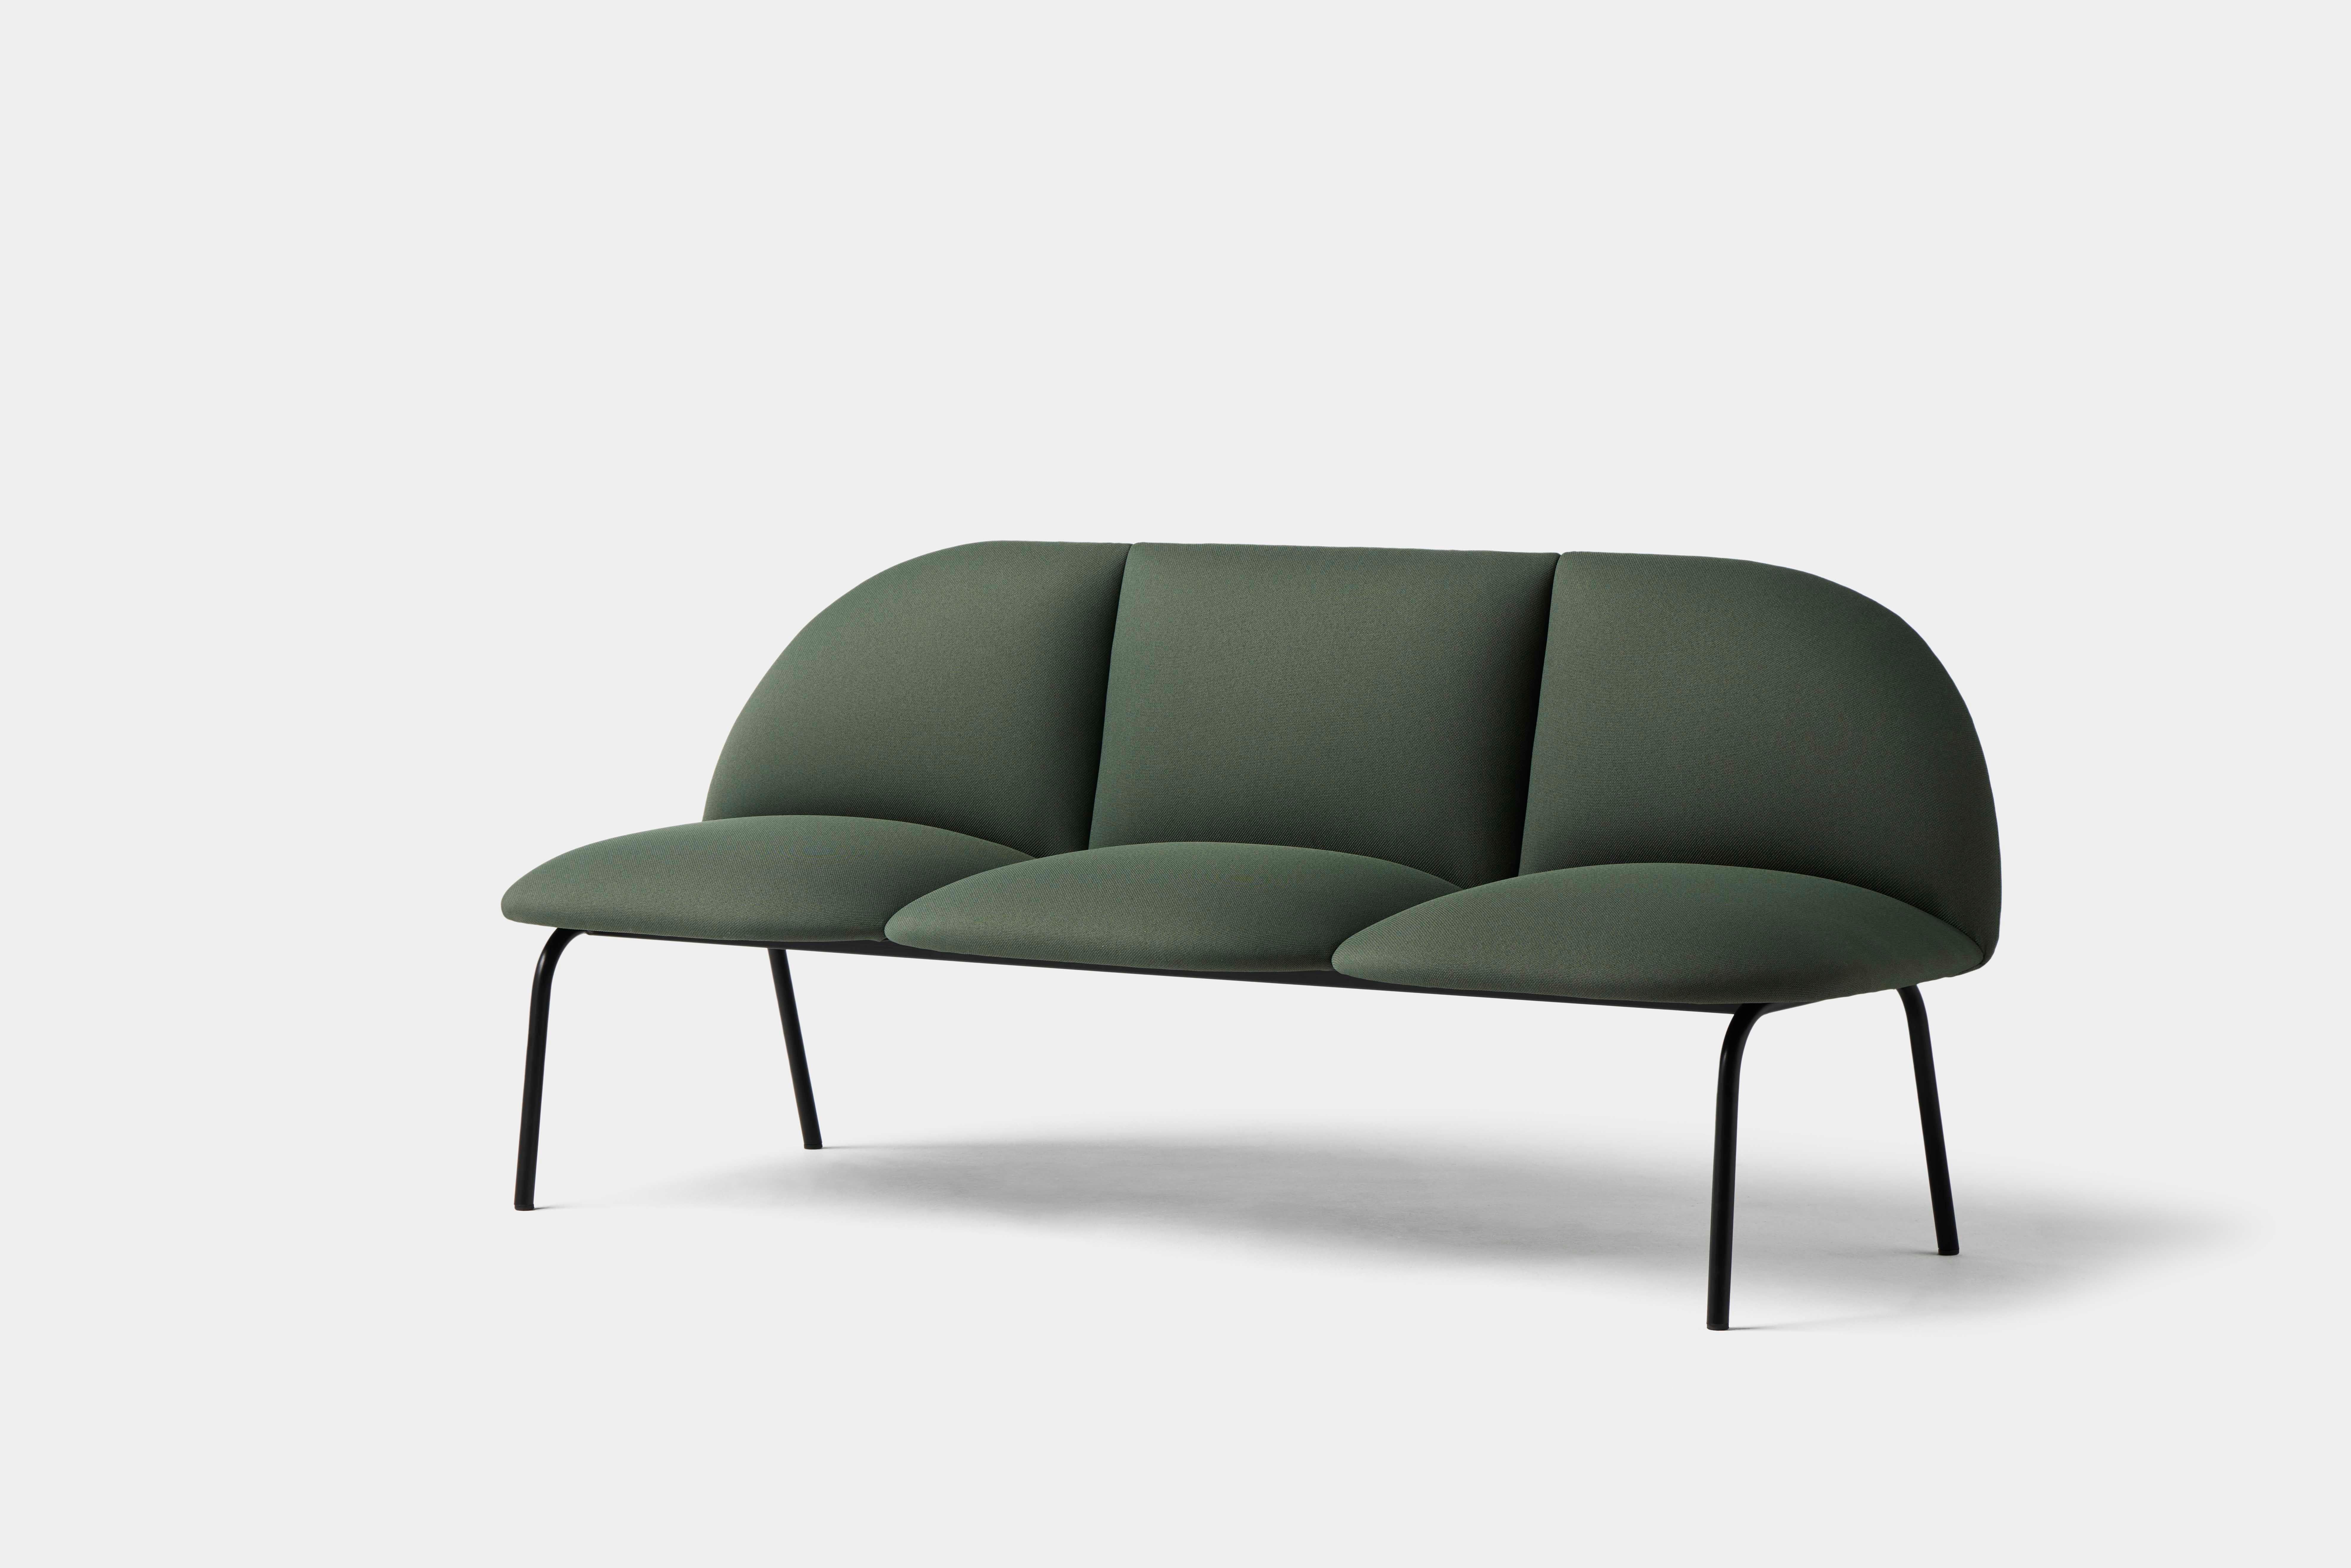 Terra 3 seater sofa by Pepe Albargues
Dimensions: W 192 x D 70 x H 82 x seat 46
Materials: Black painted iron frame and legs for others colours. Foam CMHR (high resilience and flame retardant) for all our cushion filling systems. Seat and backrest